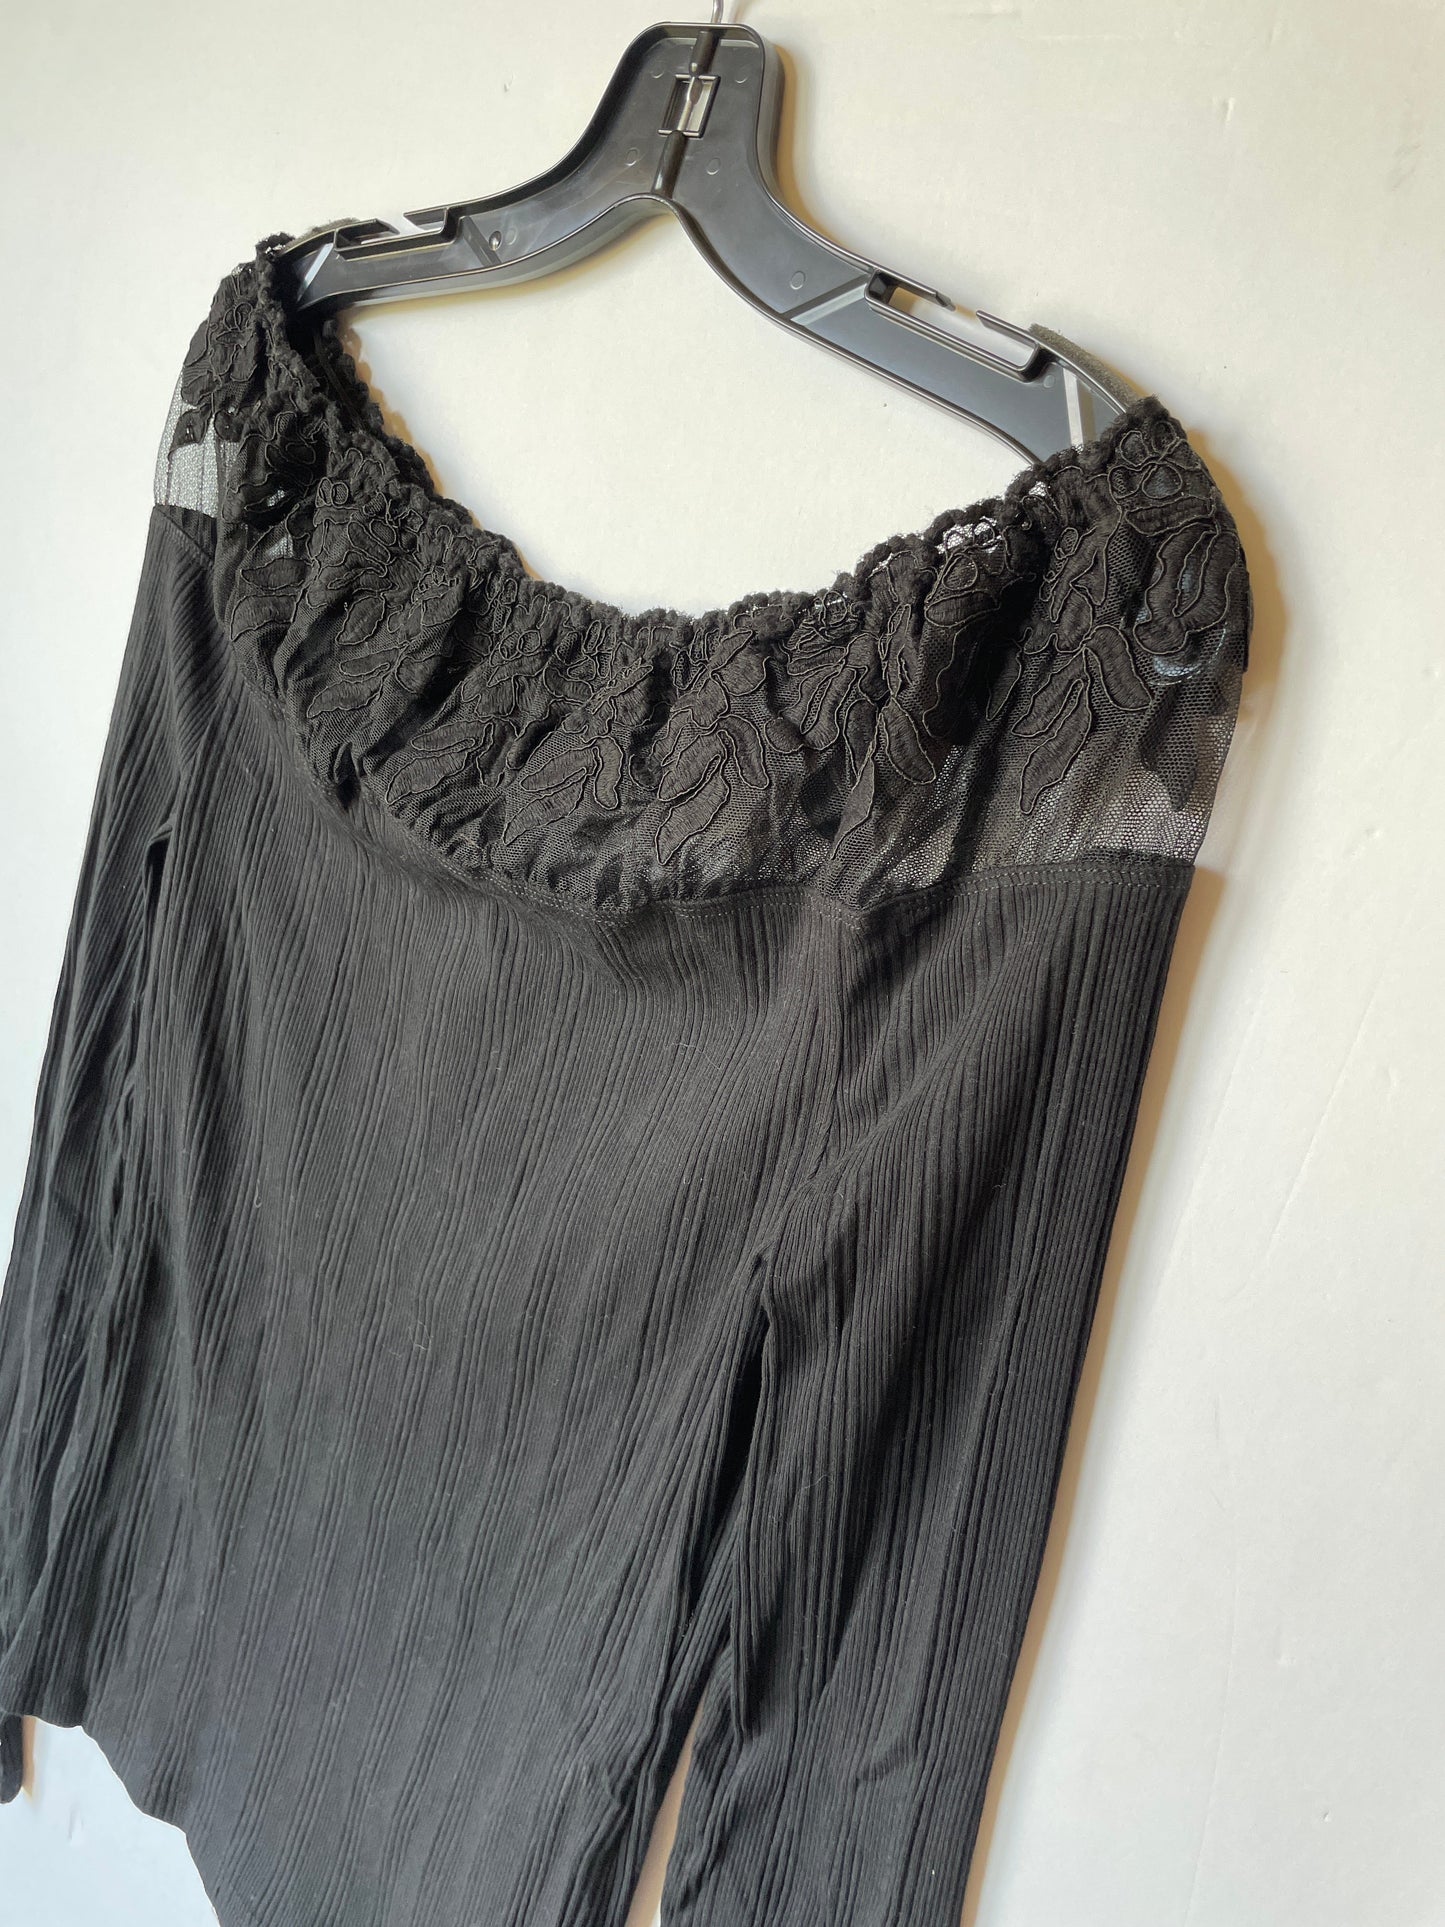 Black Top Long Sleeve Free People, Size L